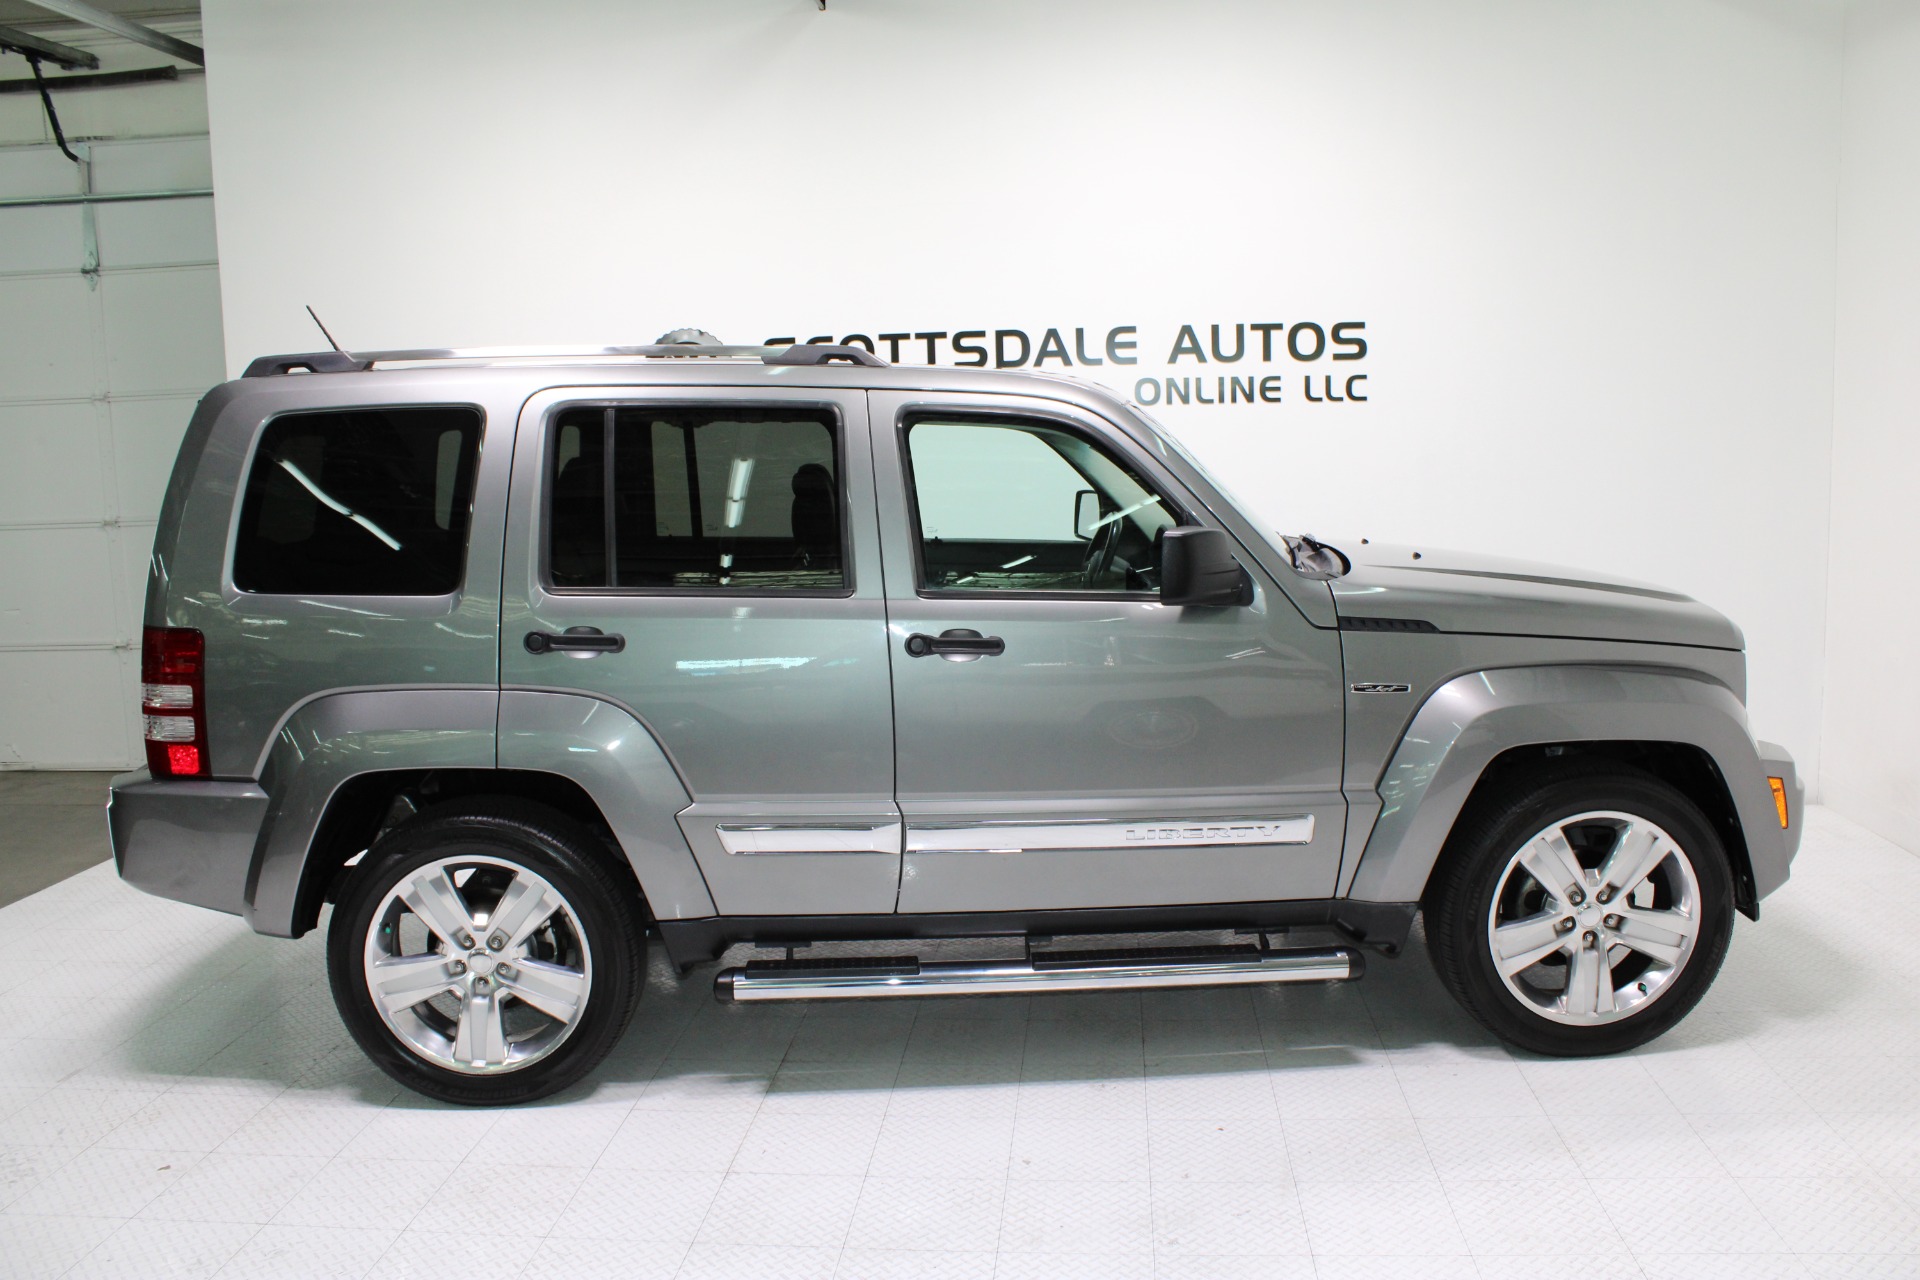 Used-2012-Jeep-Liberty-Limited-Jet-4X4-Chrysler